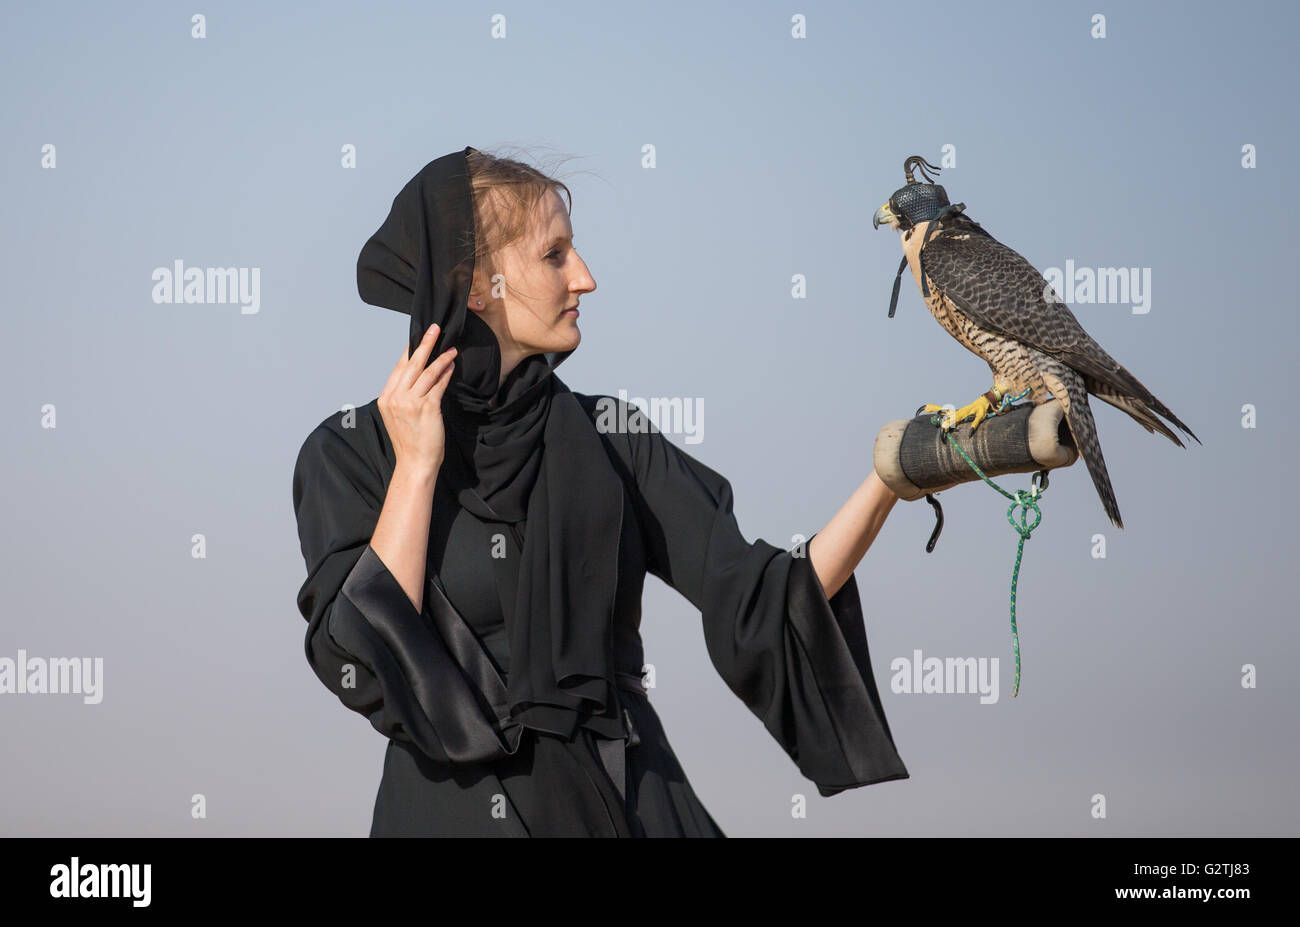 A woman wearing an abaya looking a peregrine falcon on her hand Stock Photo